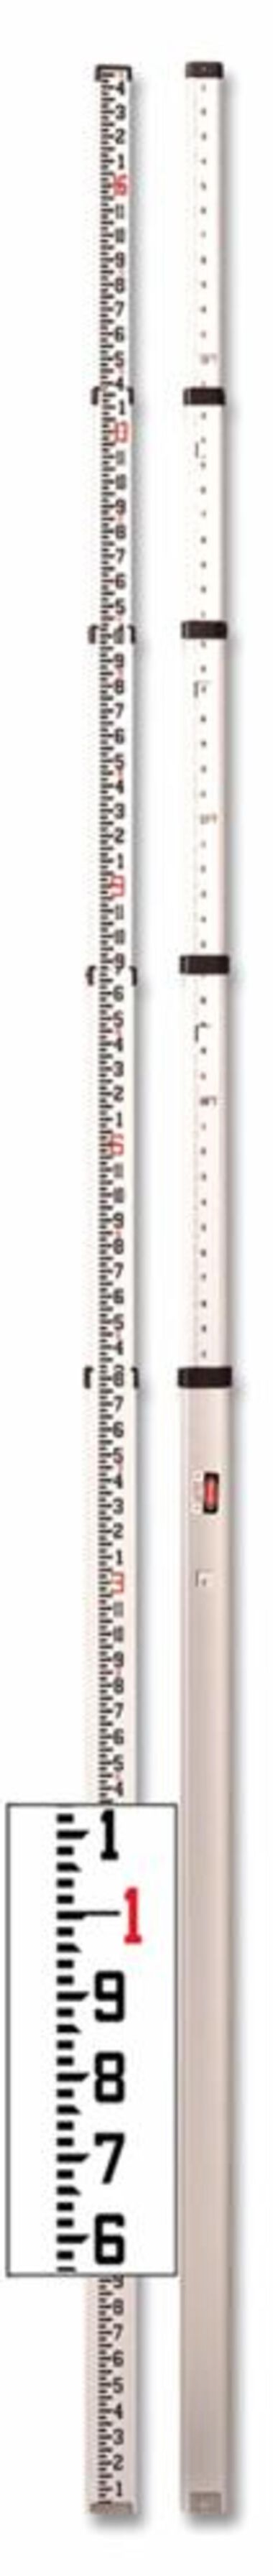 CST Berger 16 Ft. Aluminum Telescoping Rod 5 Sections Inches / 10ths